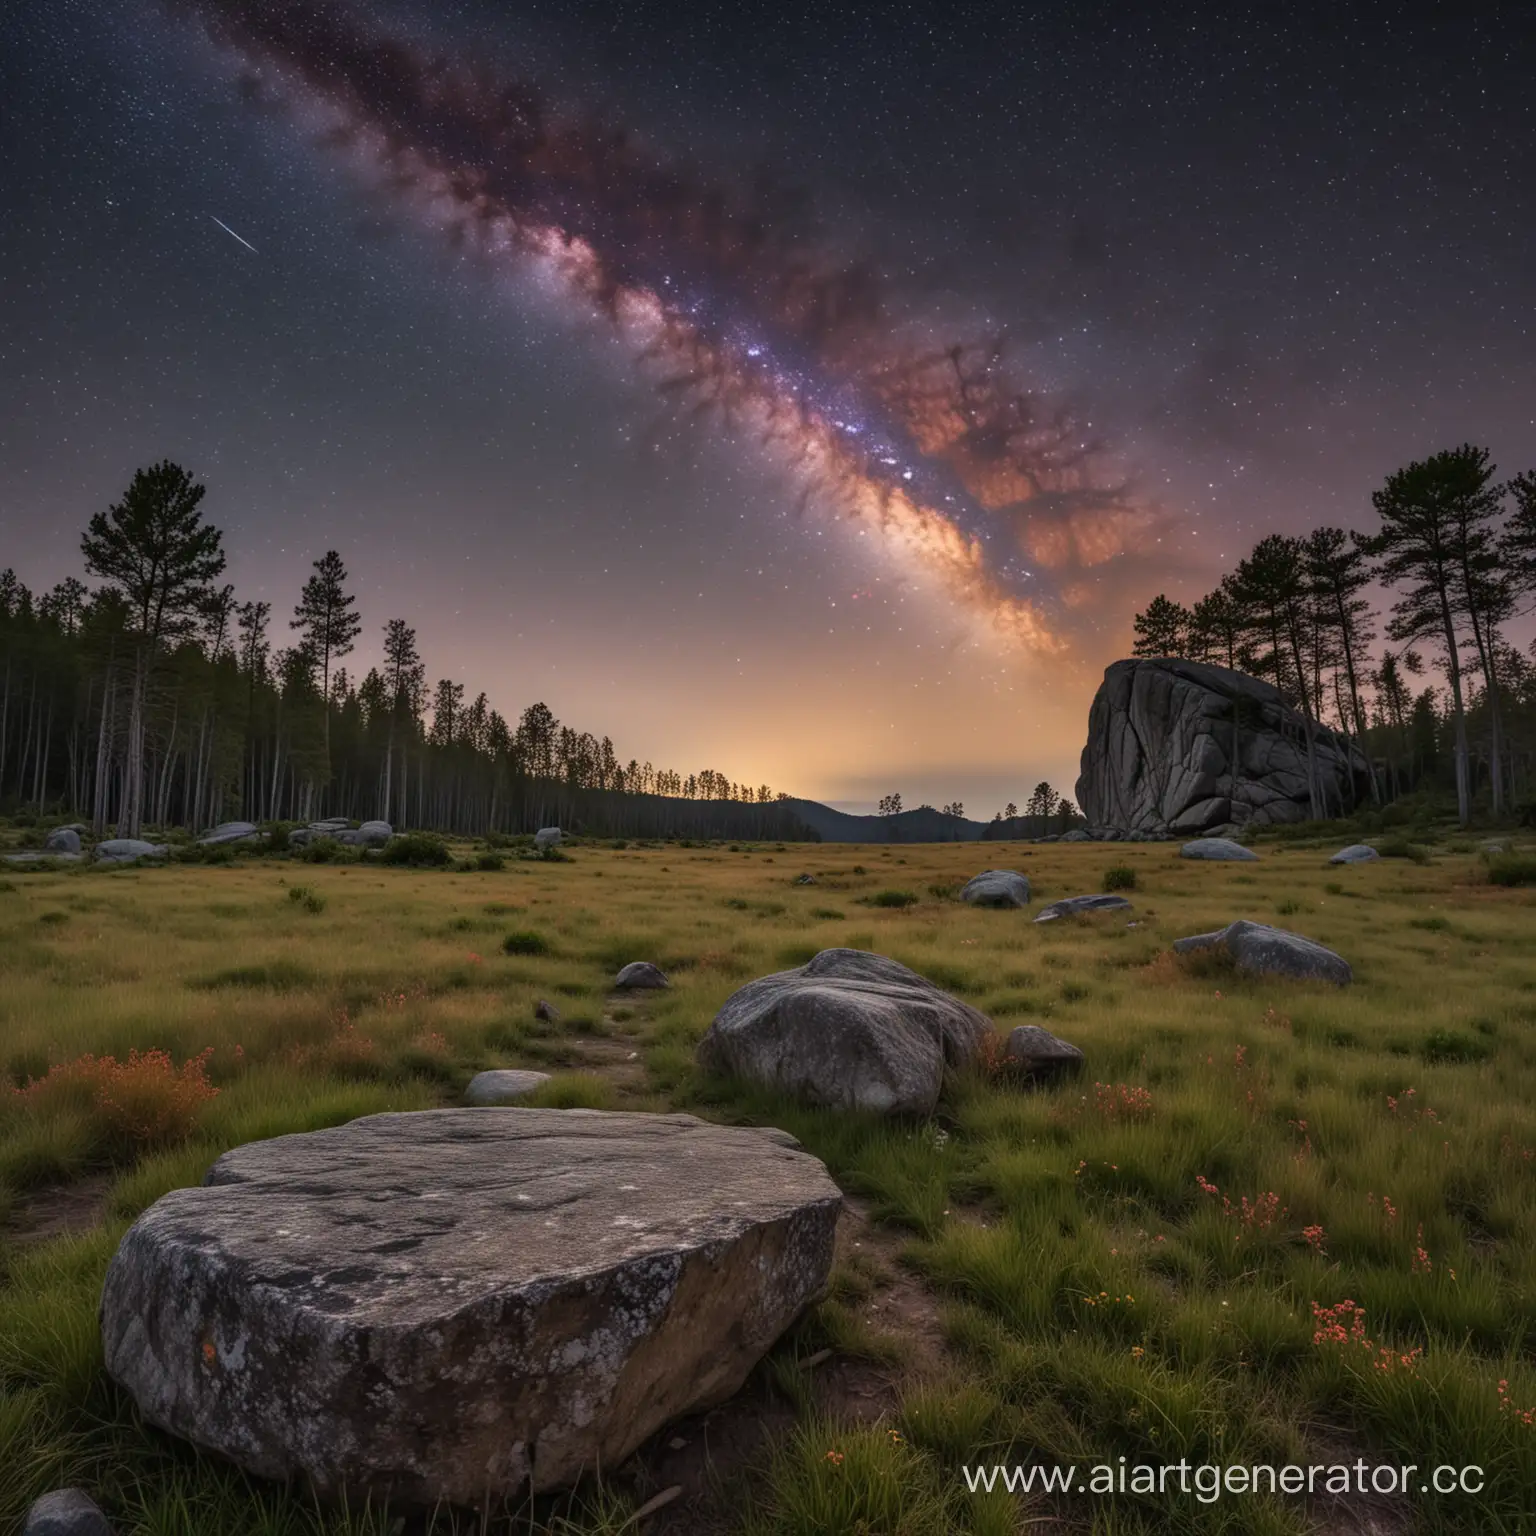 Enchanted-Night-Sky-with-Colorful-Stars-and-Lone-Rock